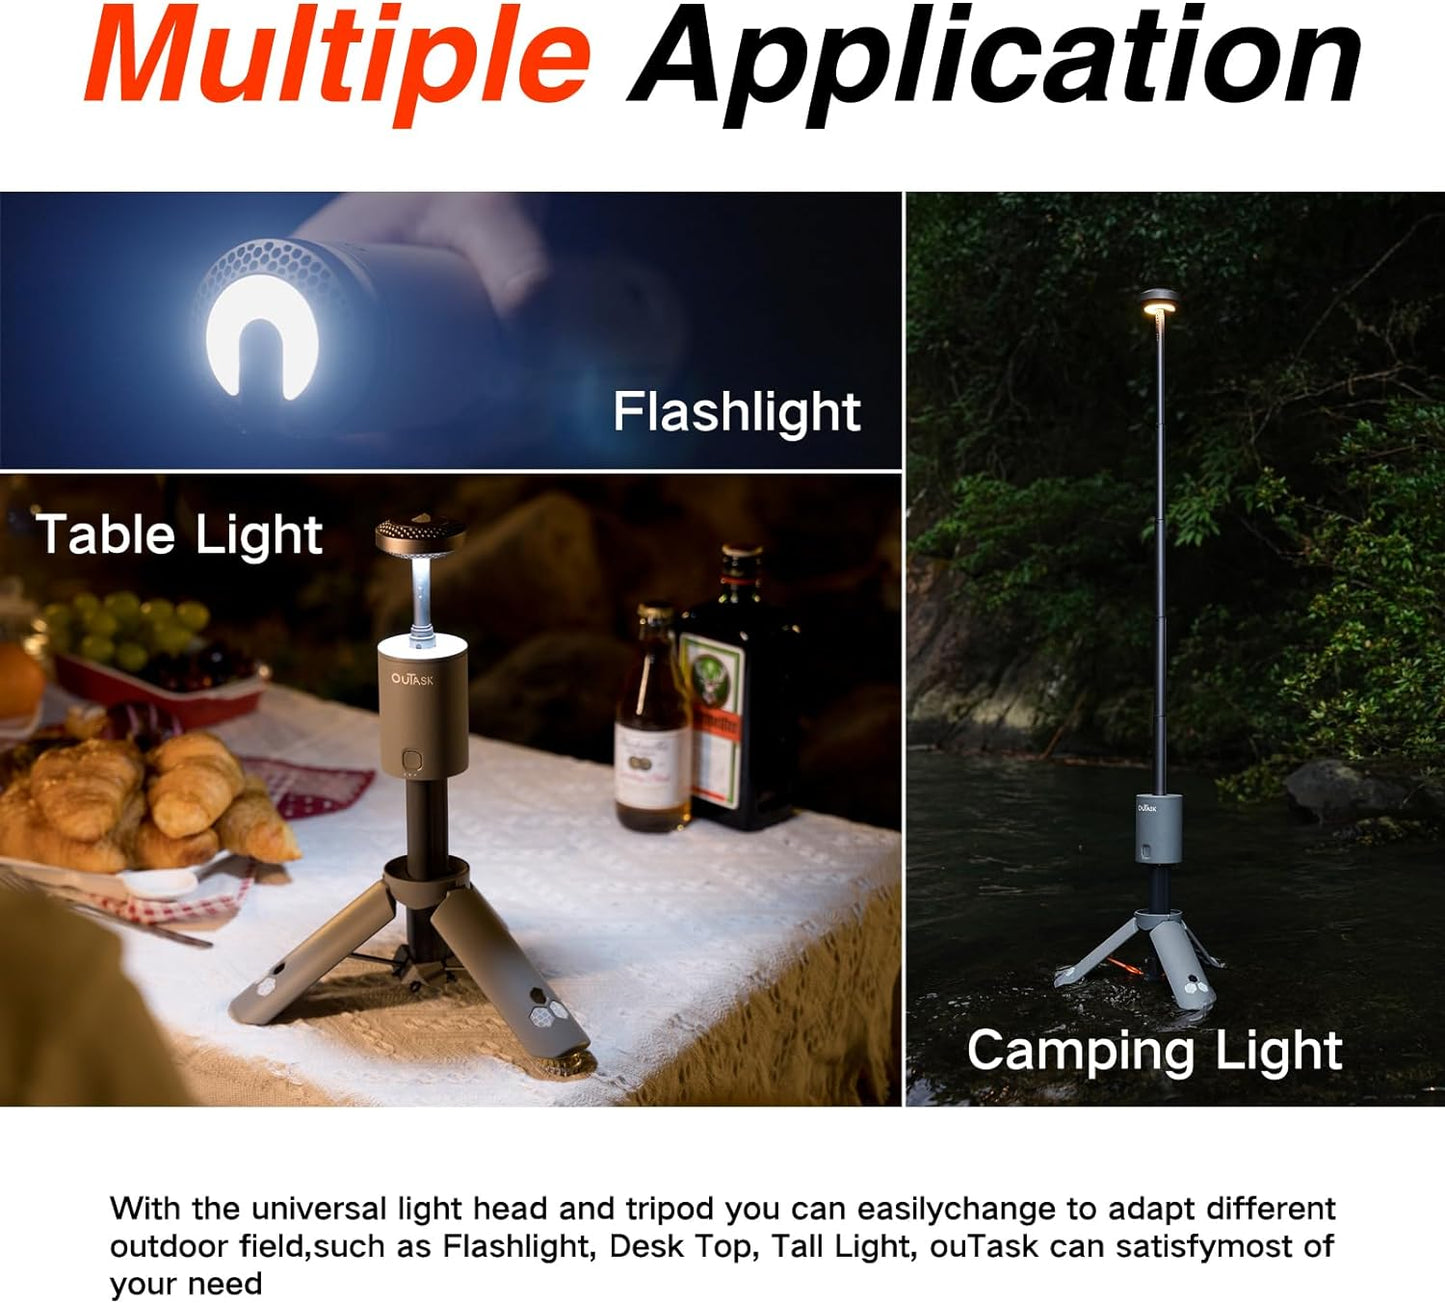 Outask Camping Lantern Rechargeable, Portable Magnetic Camping Lights with 12000mAh Battery, Telescoping IPX6/IPX7